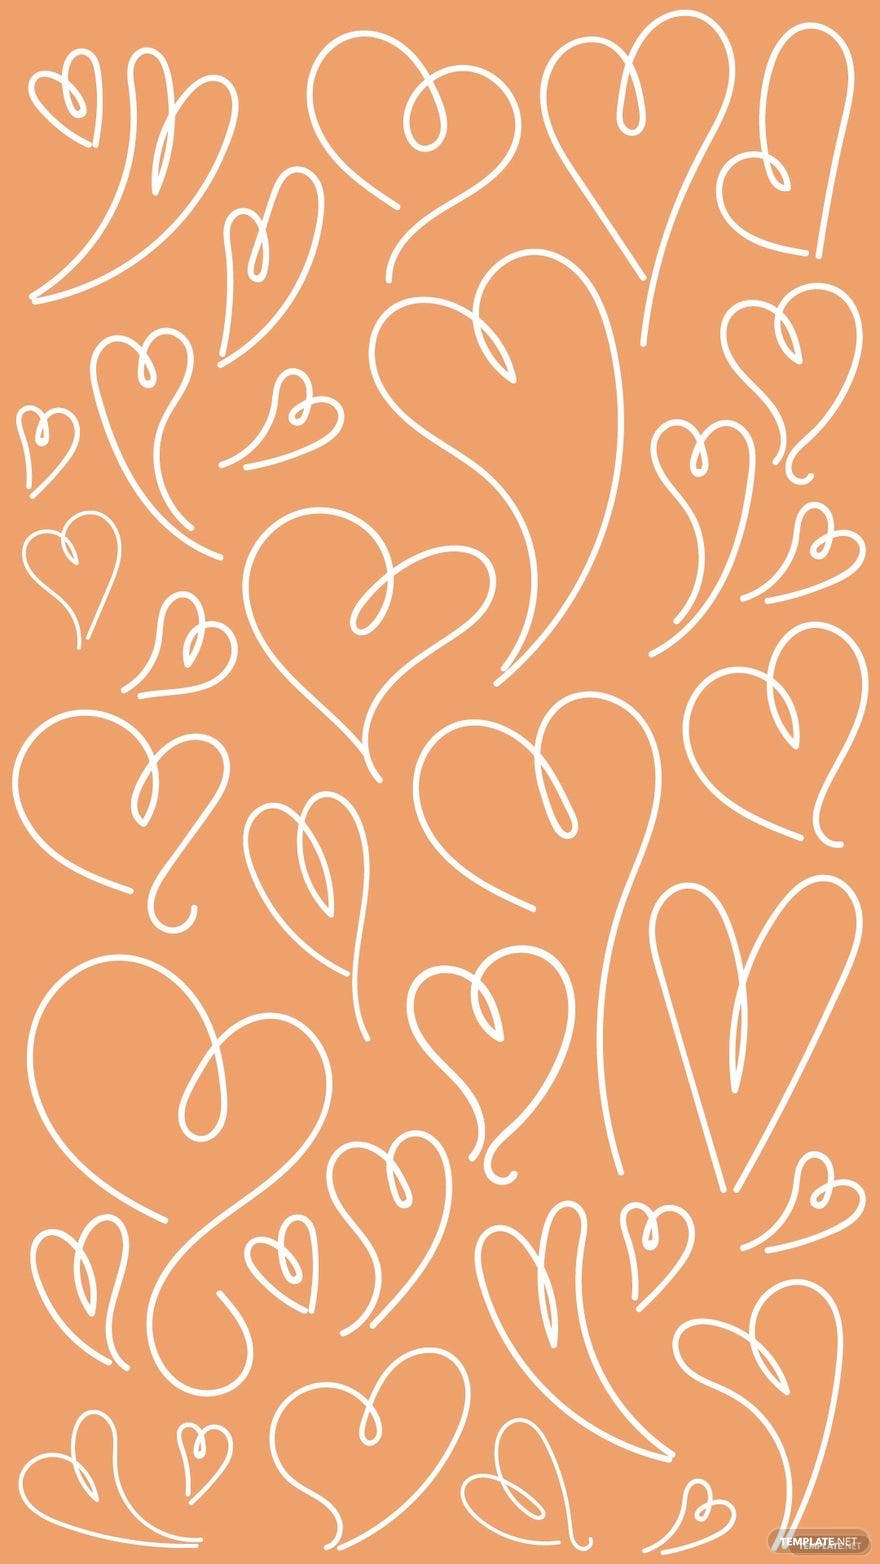 A drawing of many hearts on an orange background - Heart